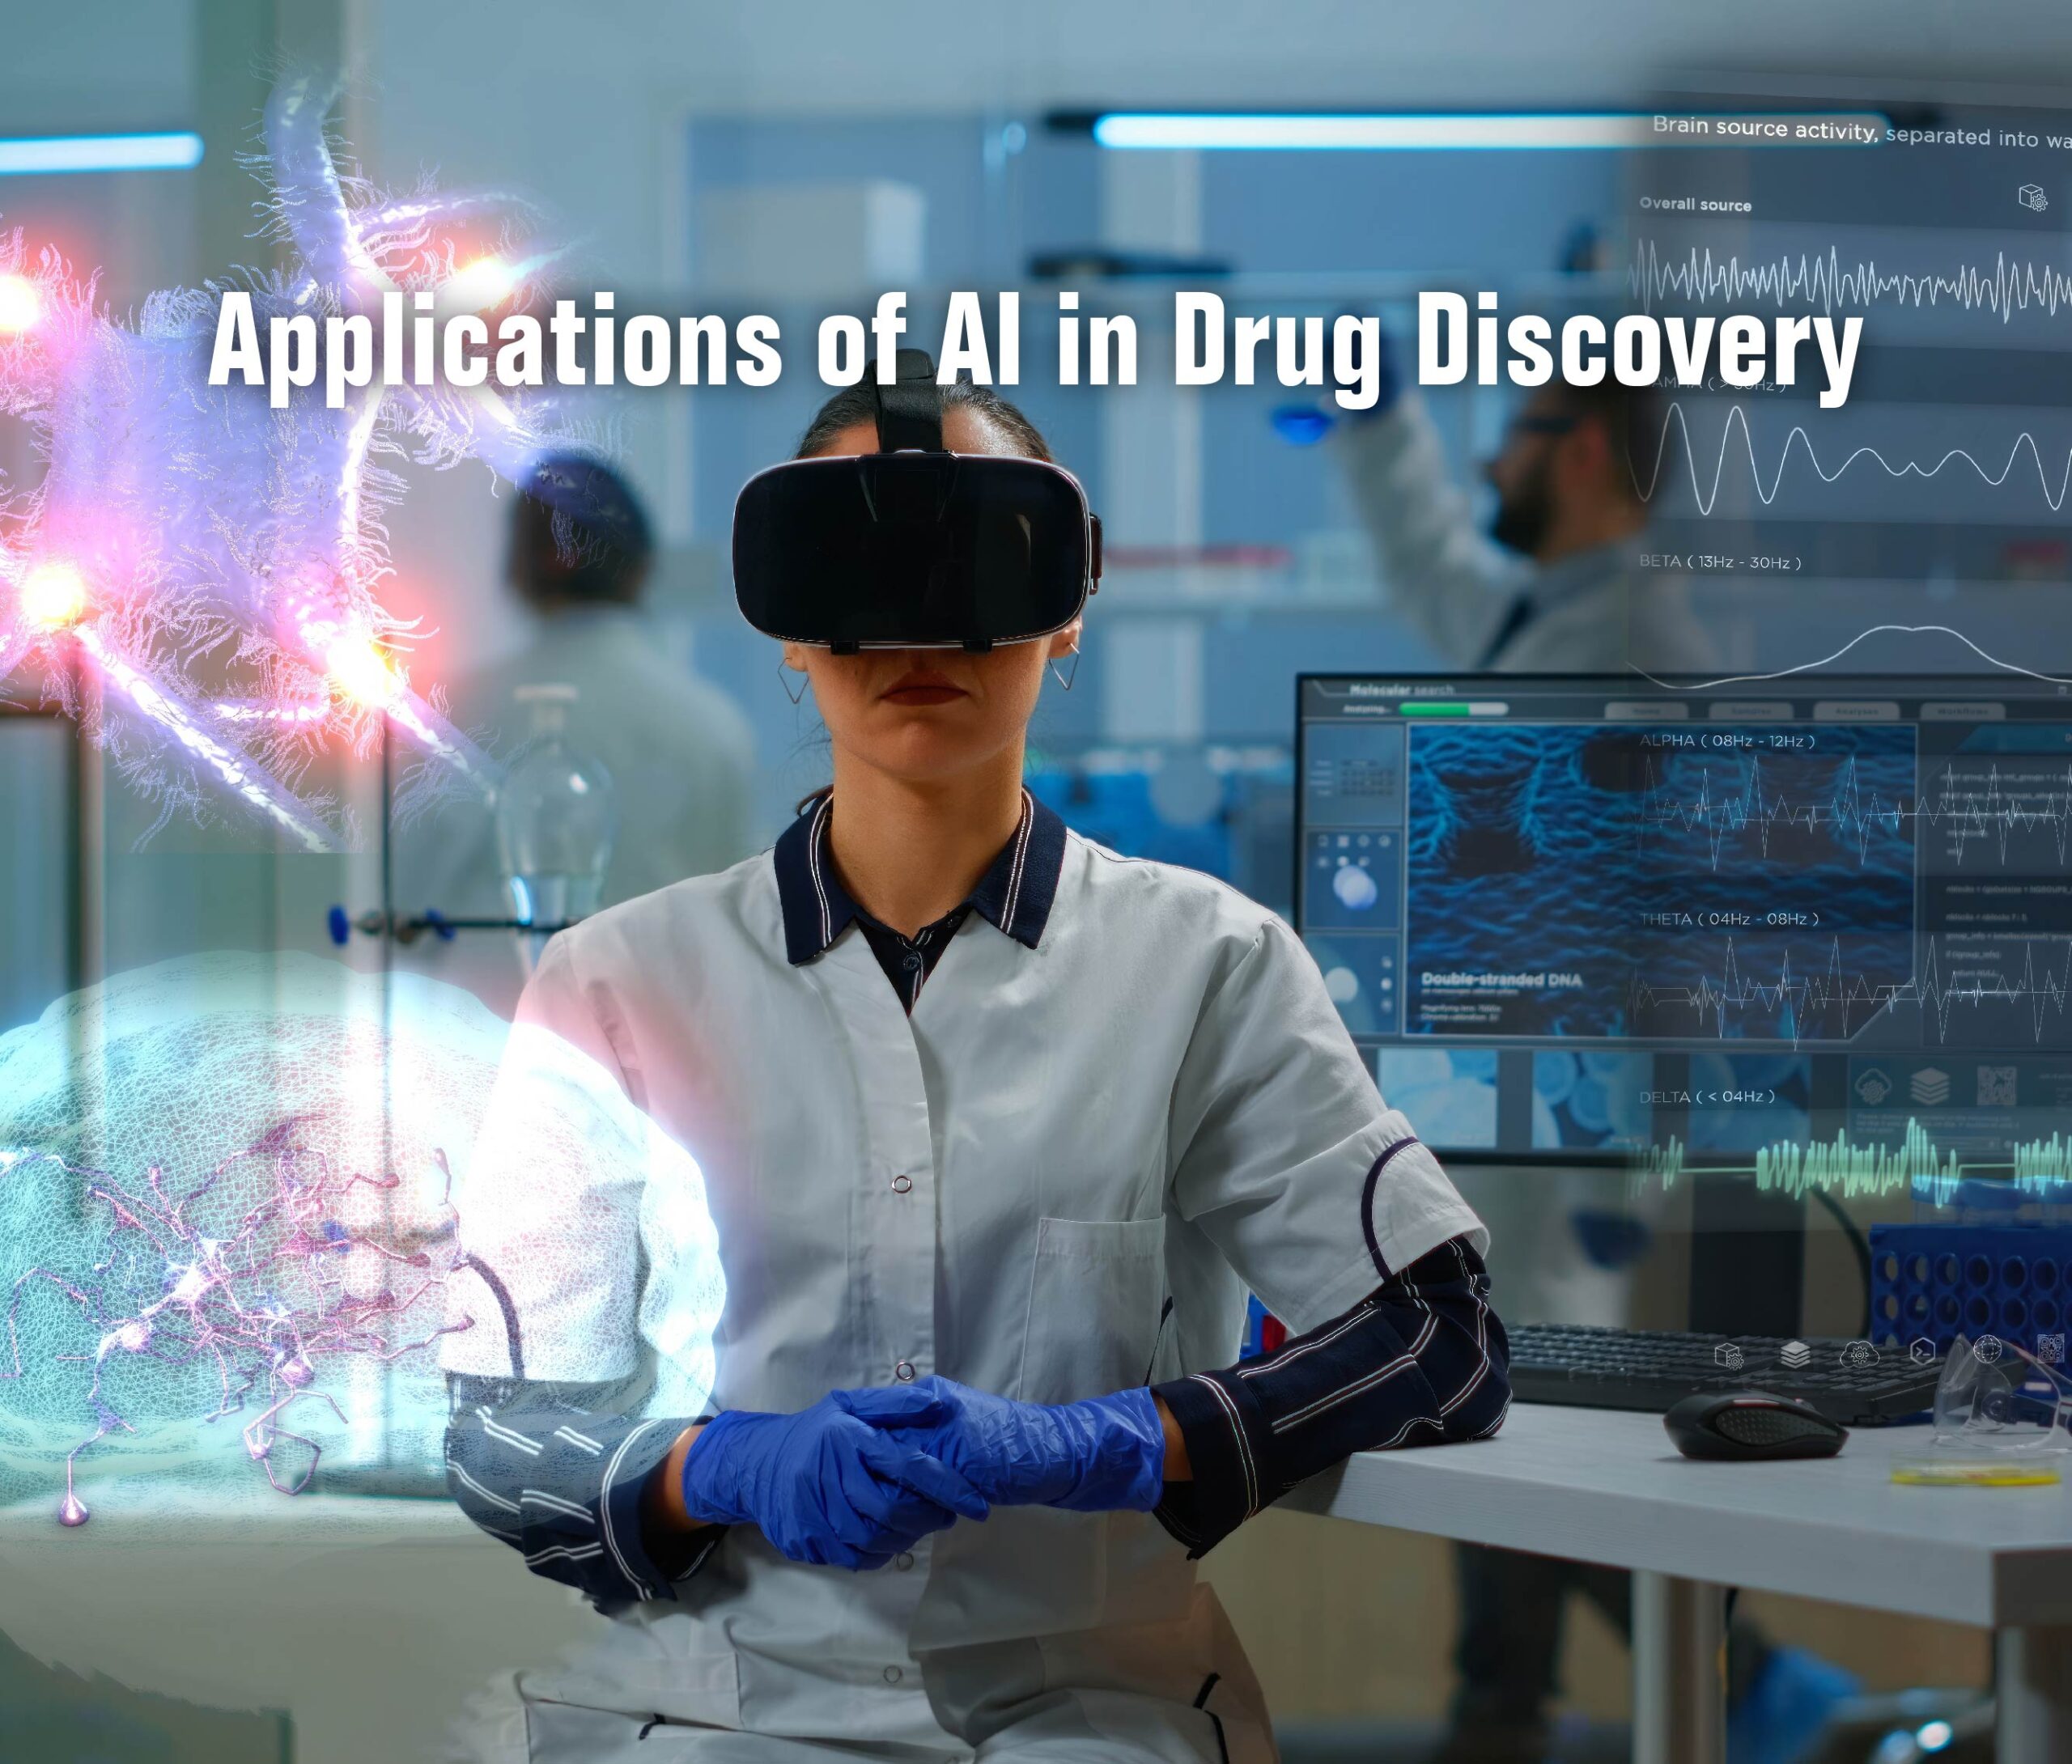 AI in Drug Discovery